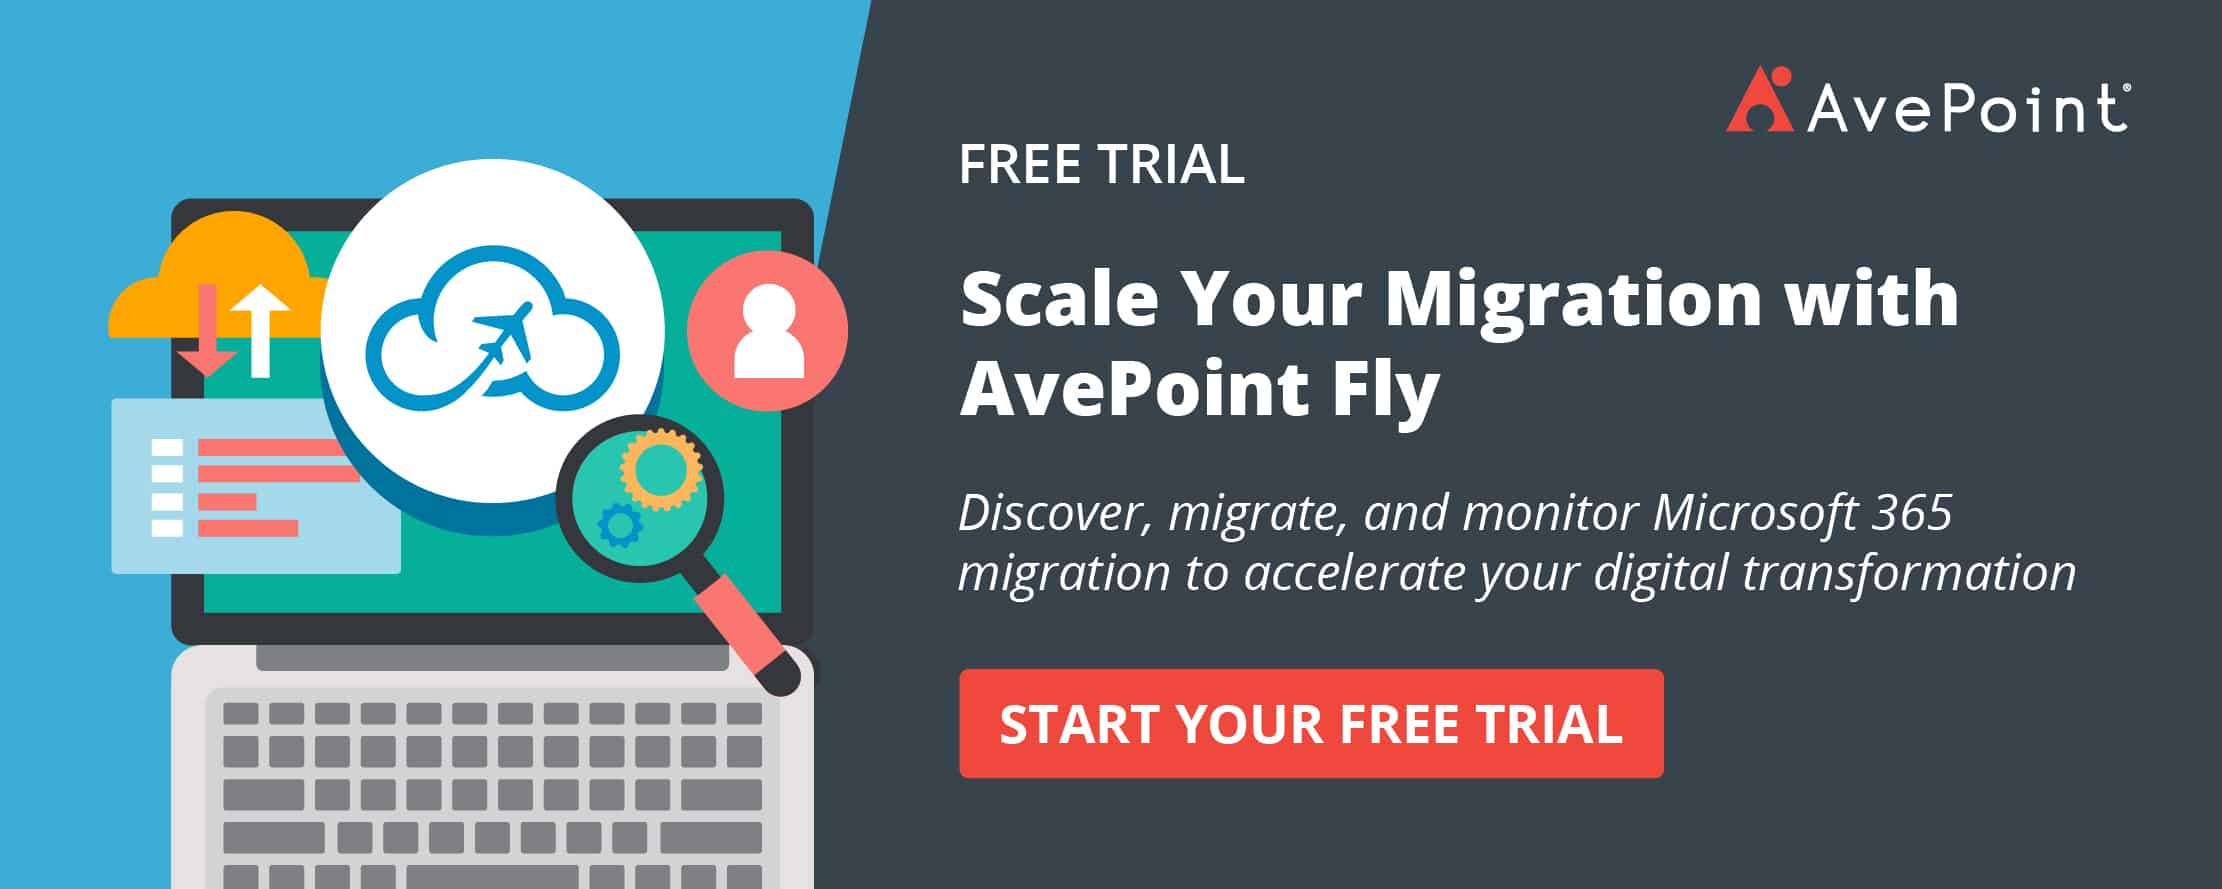 avepoint-fly-free-trial-cloud-migration